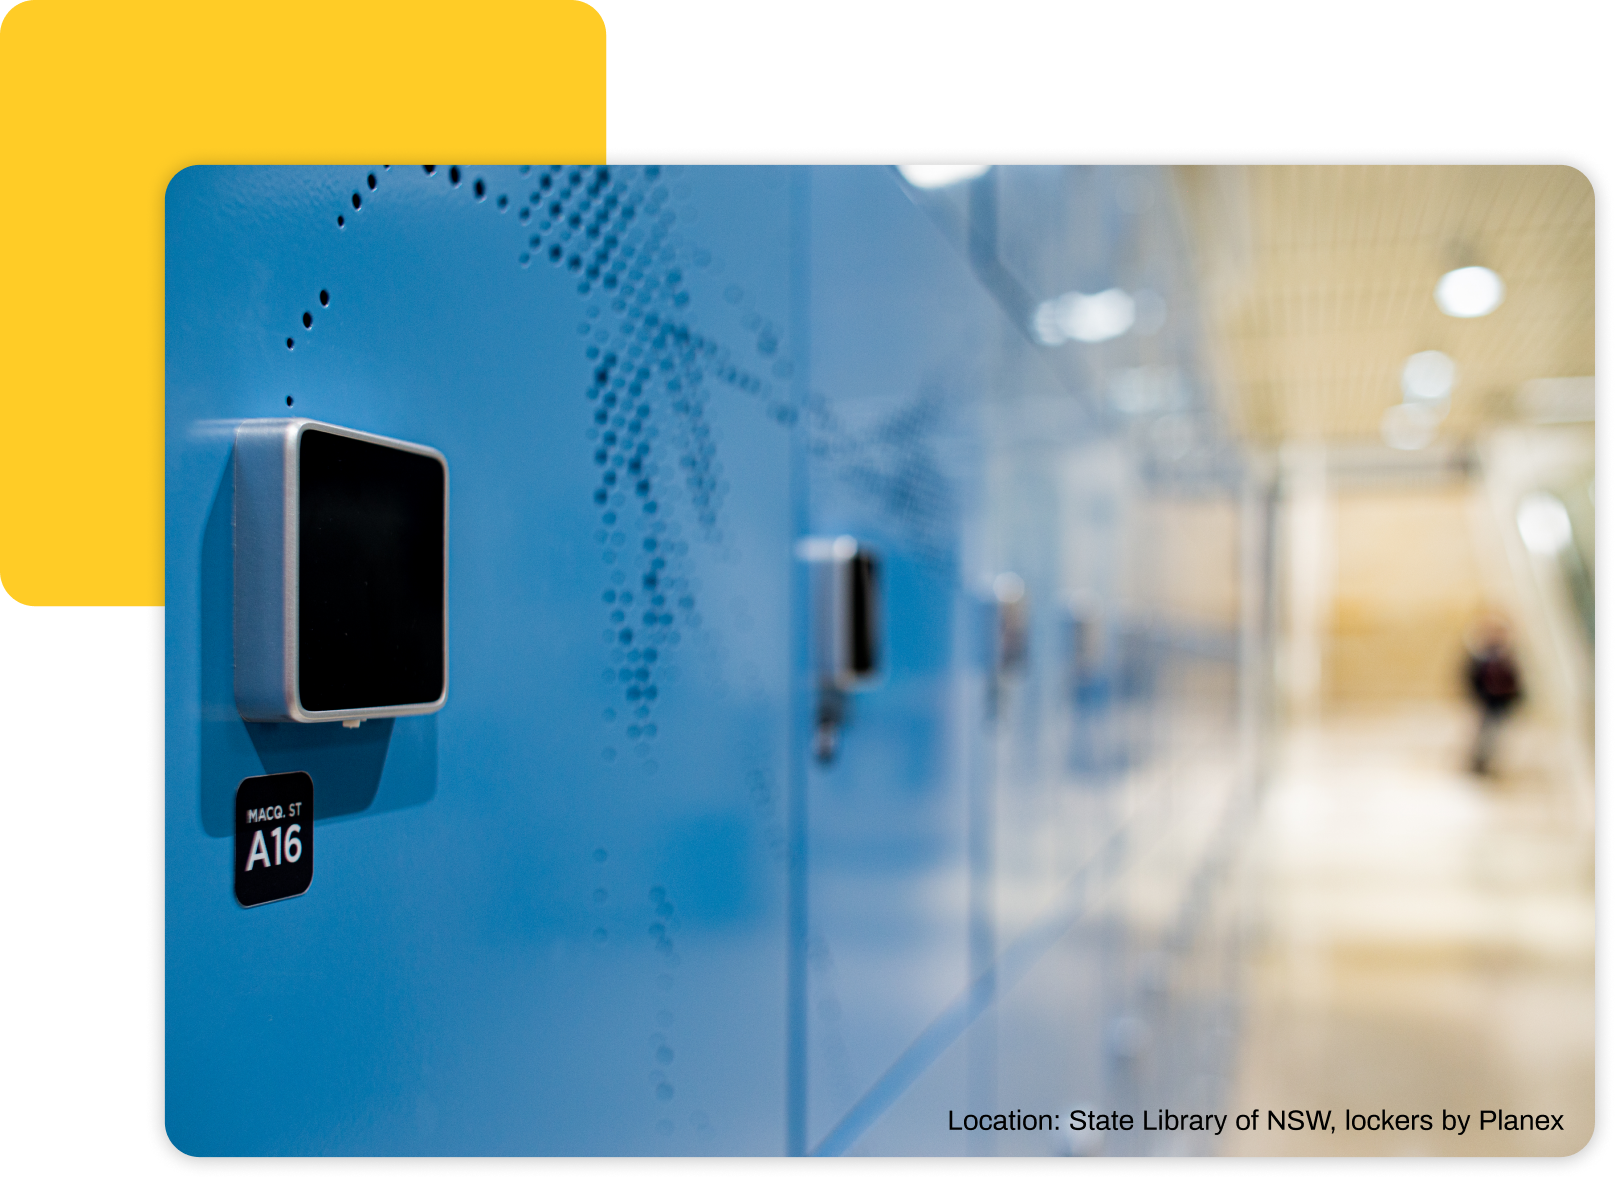 Yellowbox lockers at the State Library of NSW